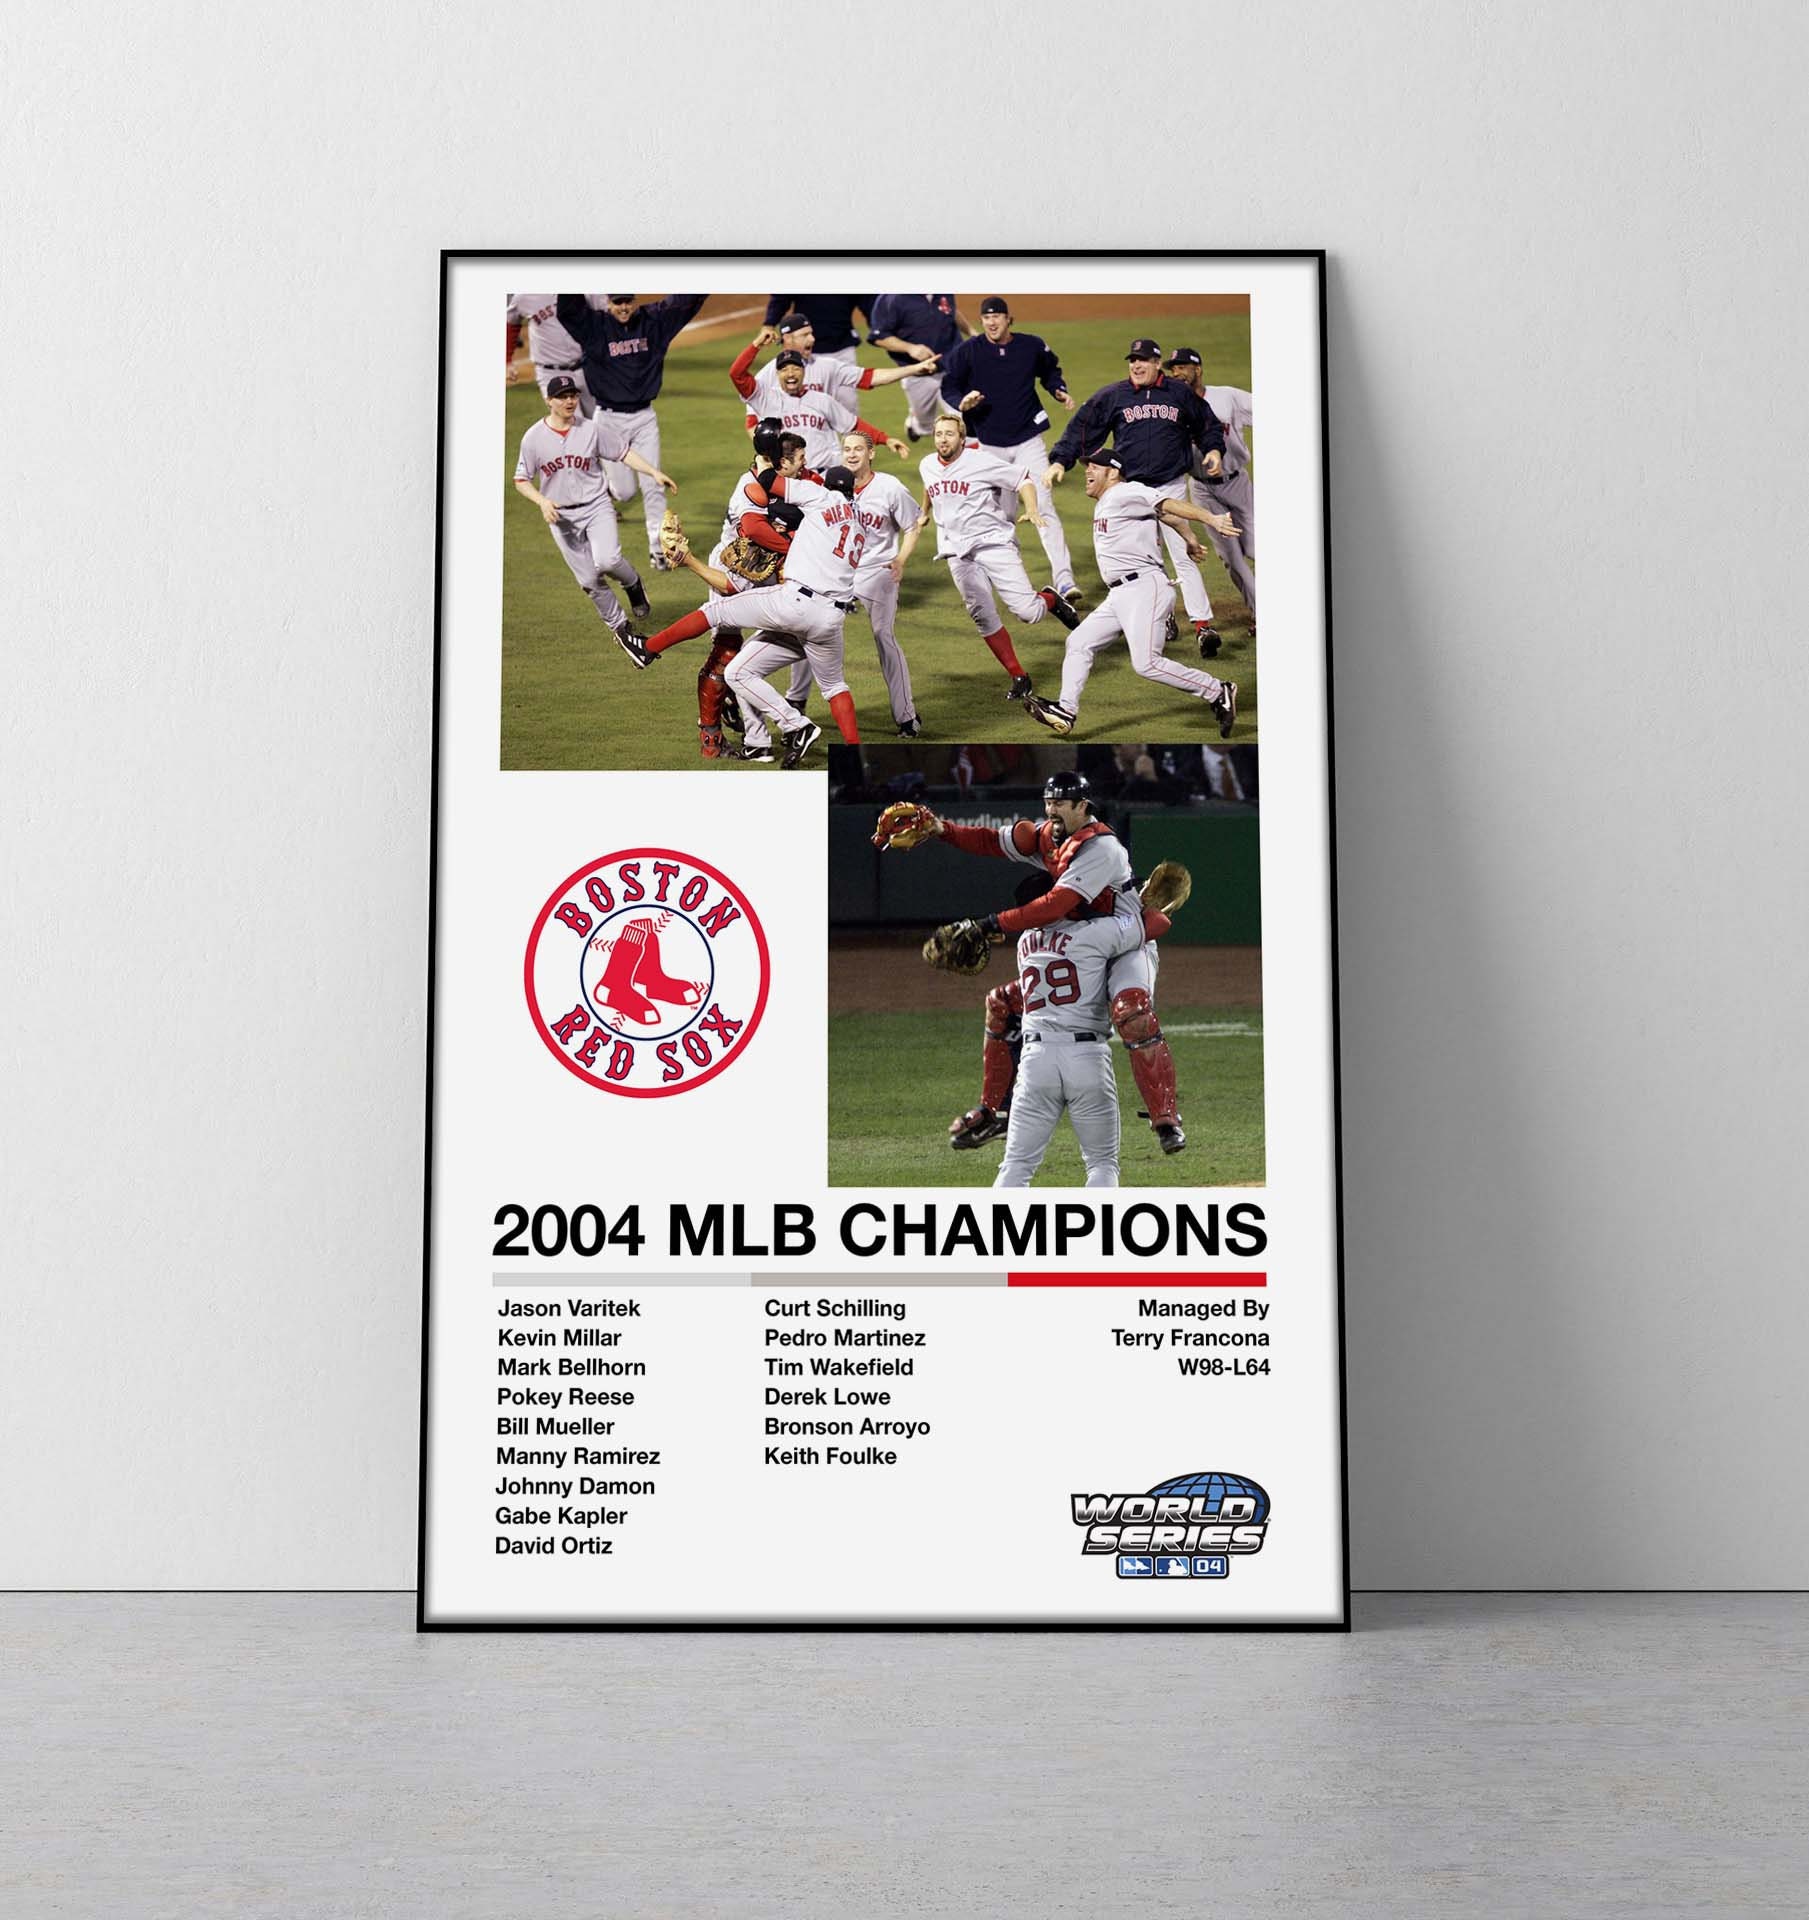 Store: 2004 World Series Collectibles 